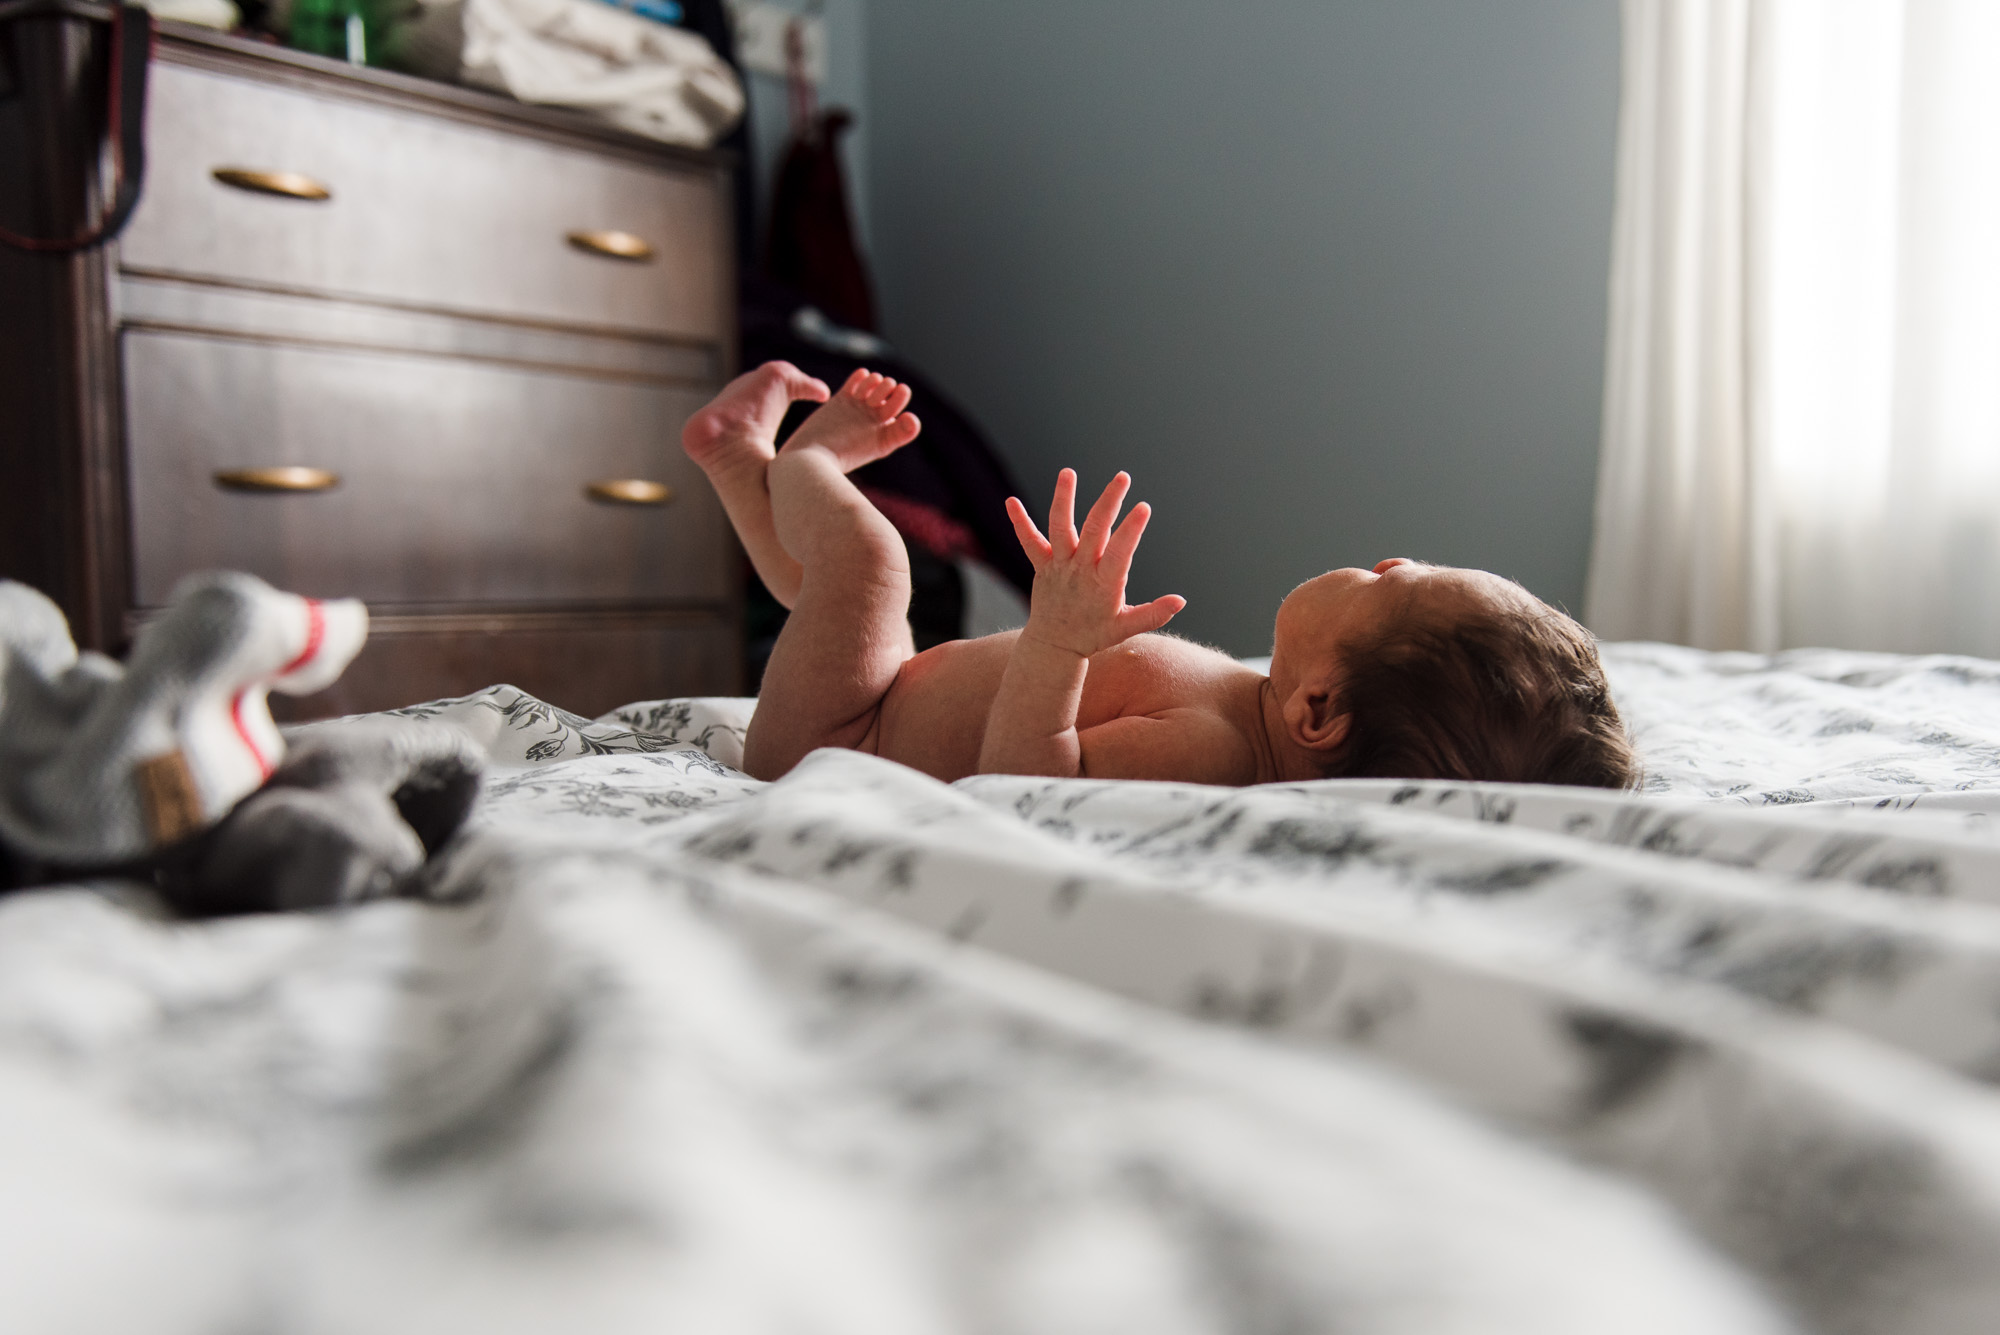 A newborn baby lays on a bed in the light